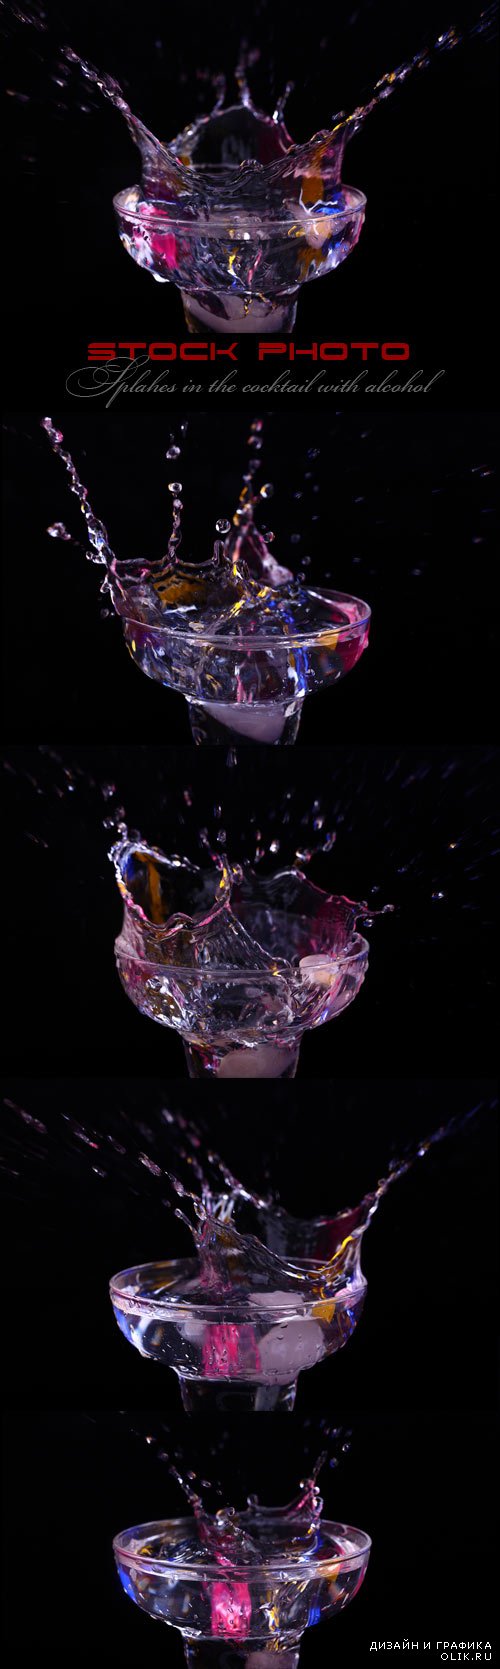 Splahes in the cocktail with alcohol